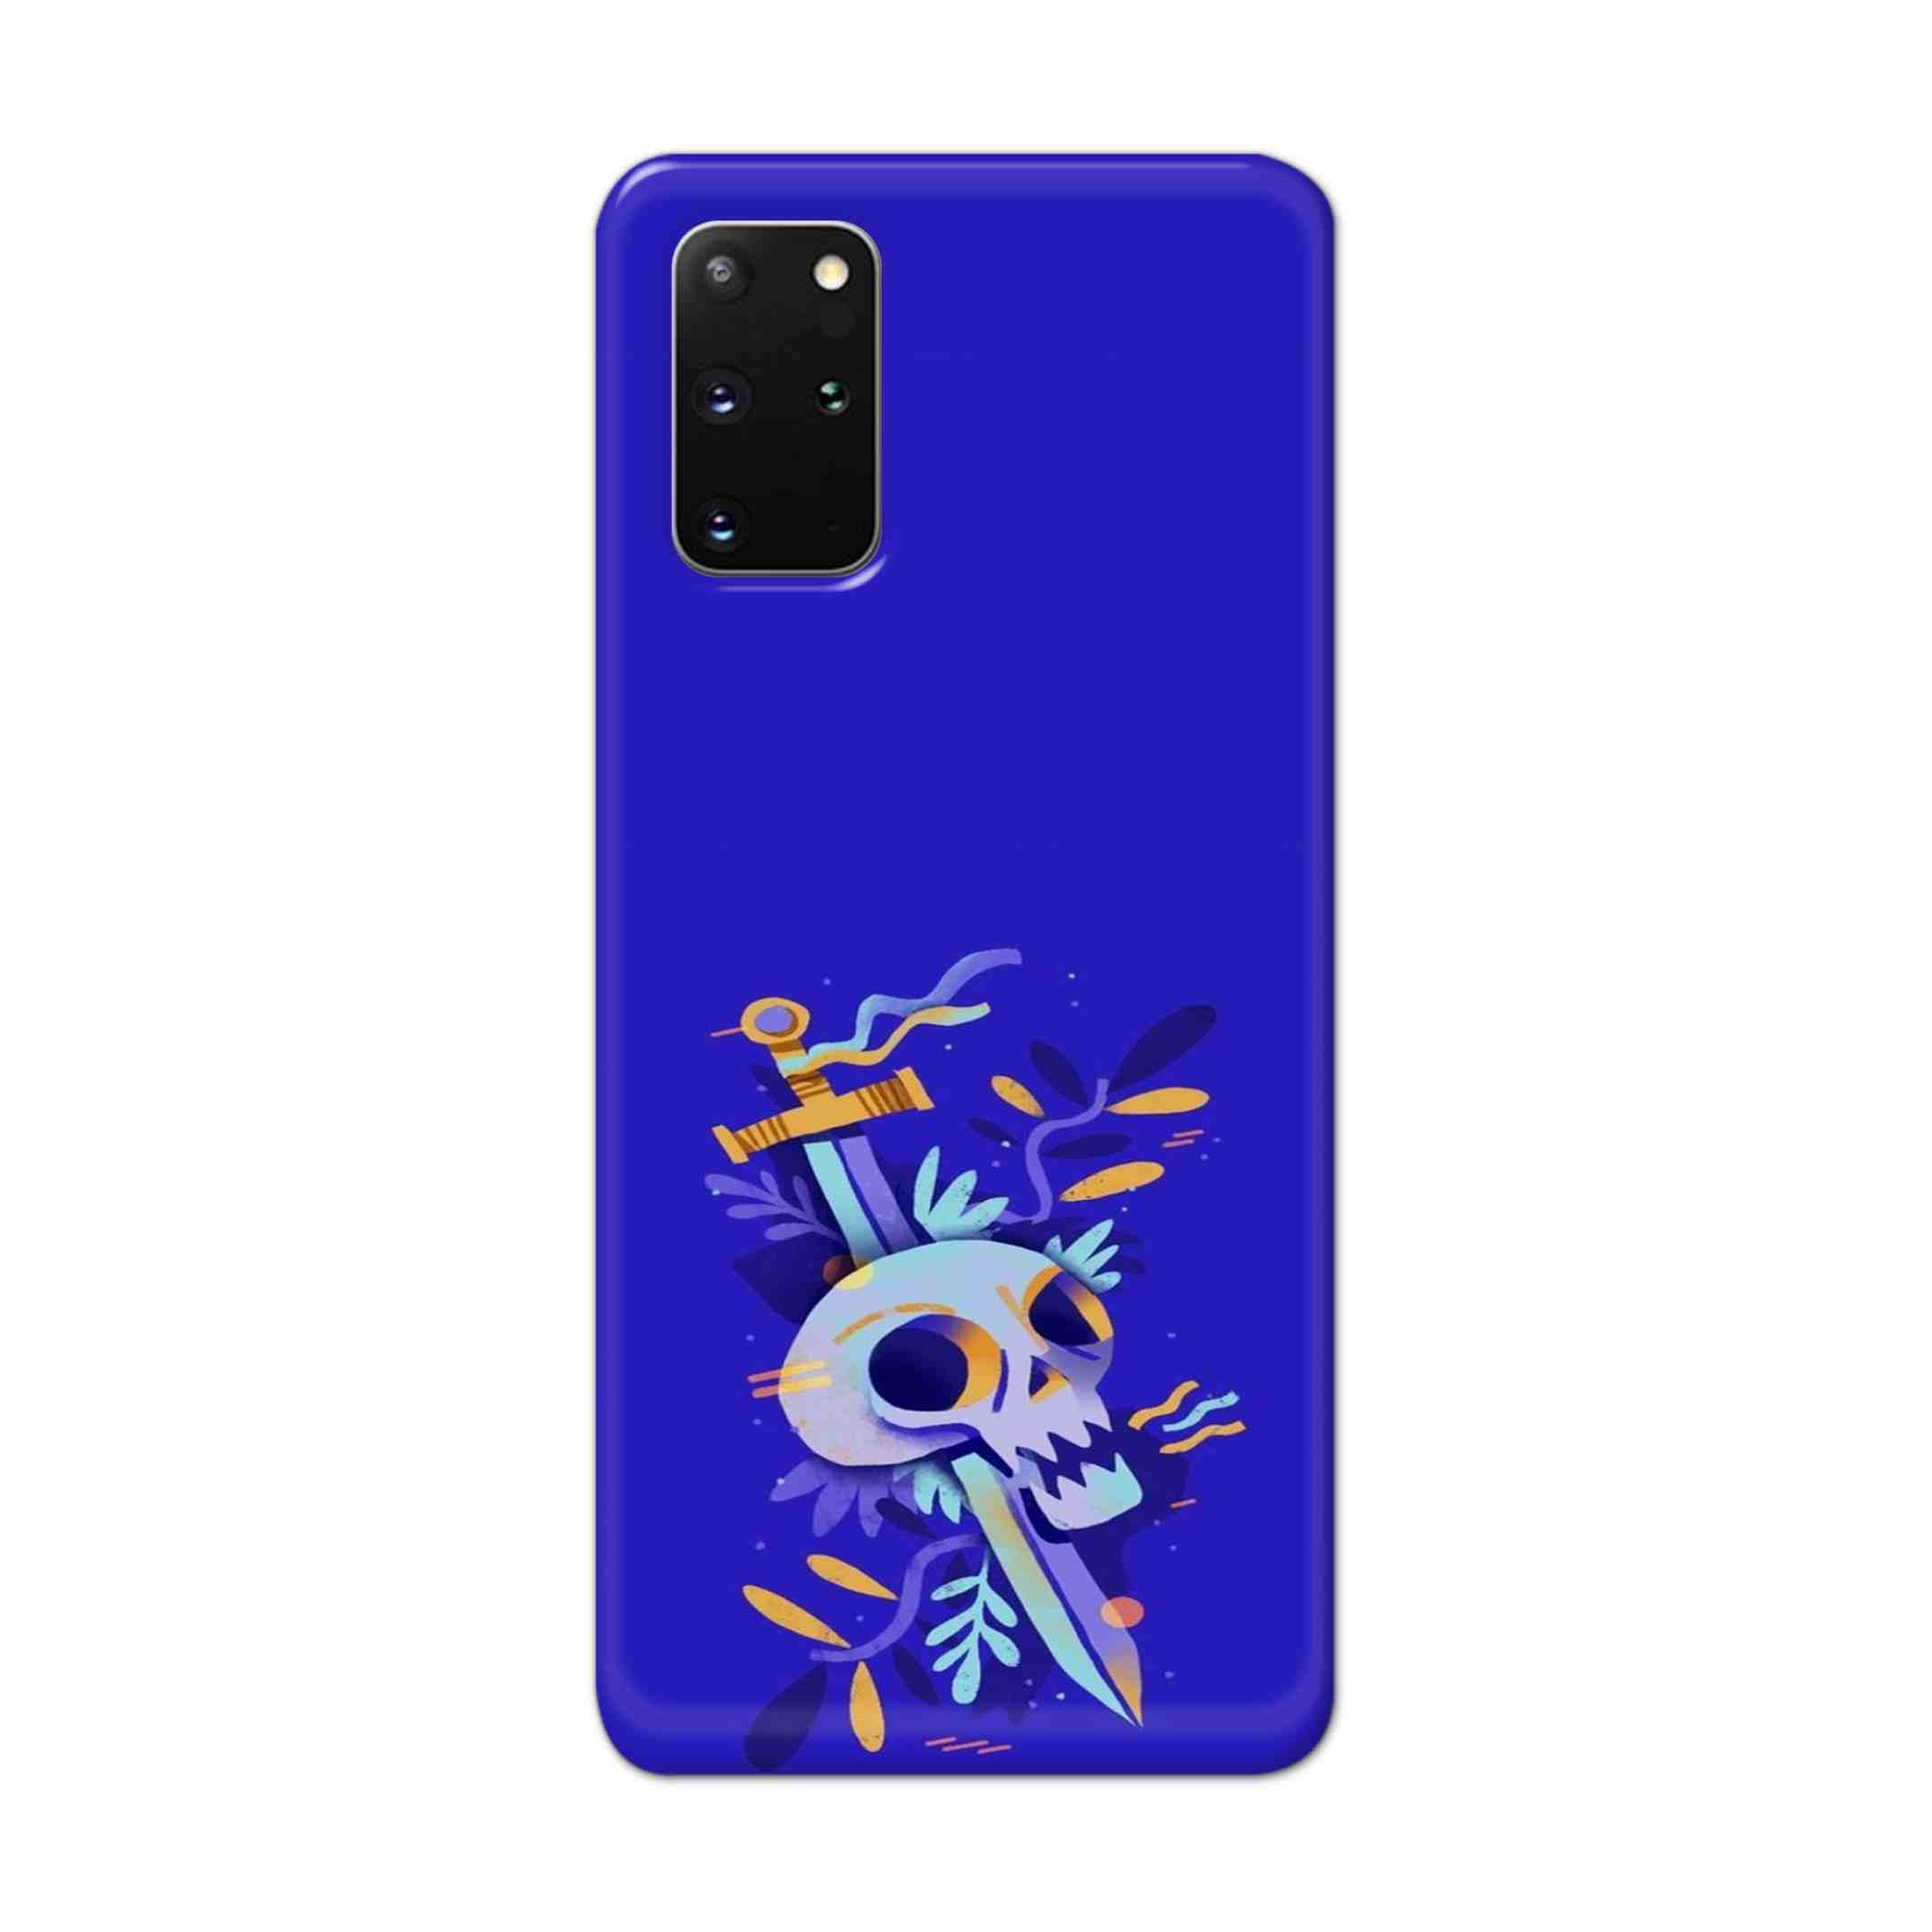 Buy Blue Skull Hard Back Mobile Phone Case Cover For Samsung Galaxy S20 Plus Online